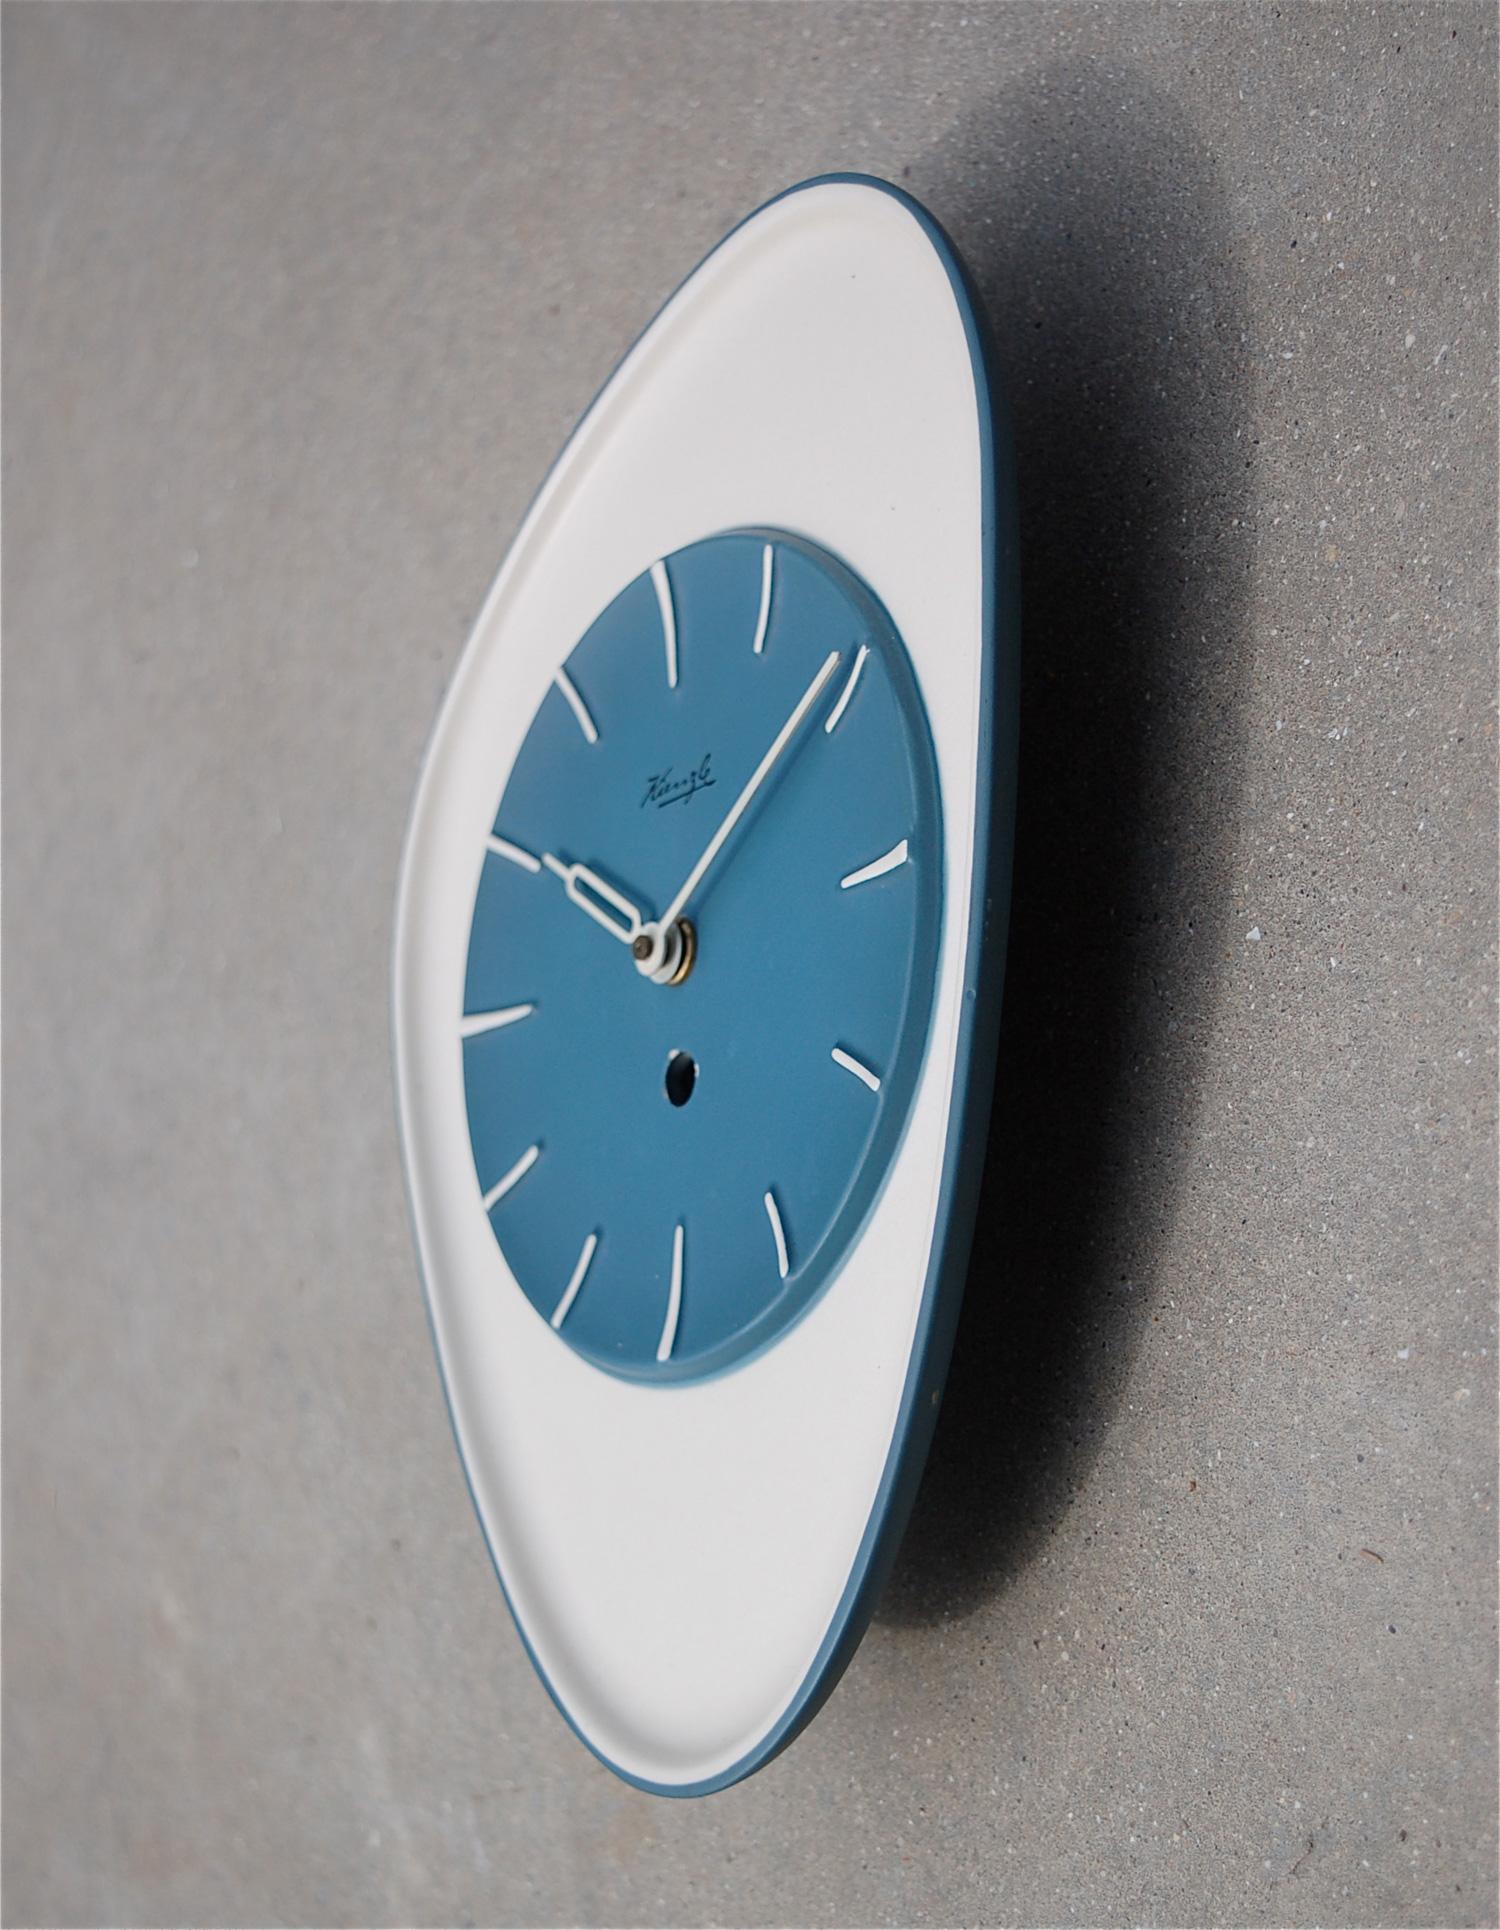 Mid-Century Modern ceramic wall clock by German quality manufacturer Kienzle. The design is quintessentially 1950s with its asymmetrical shape in a matte blue and white/cream glaze. The makers name is featured at the top of the dial. The hours are